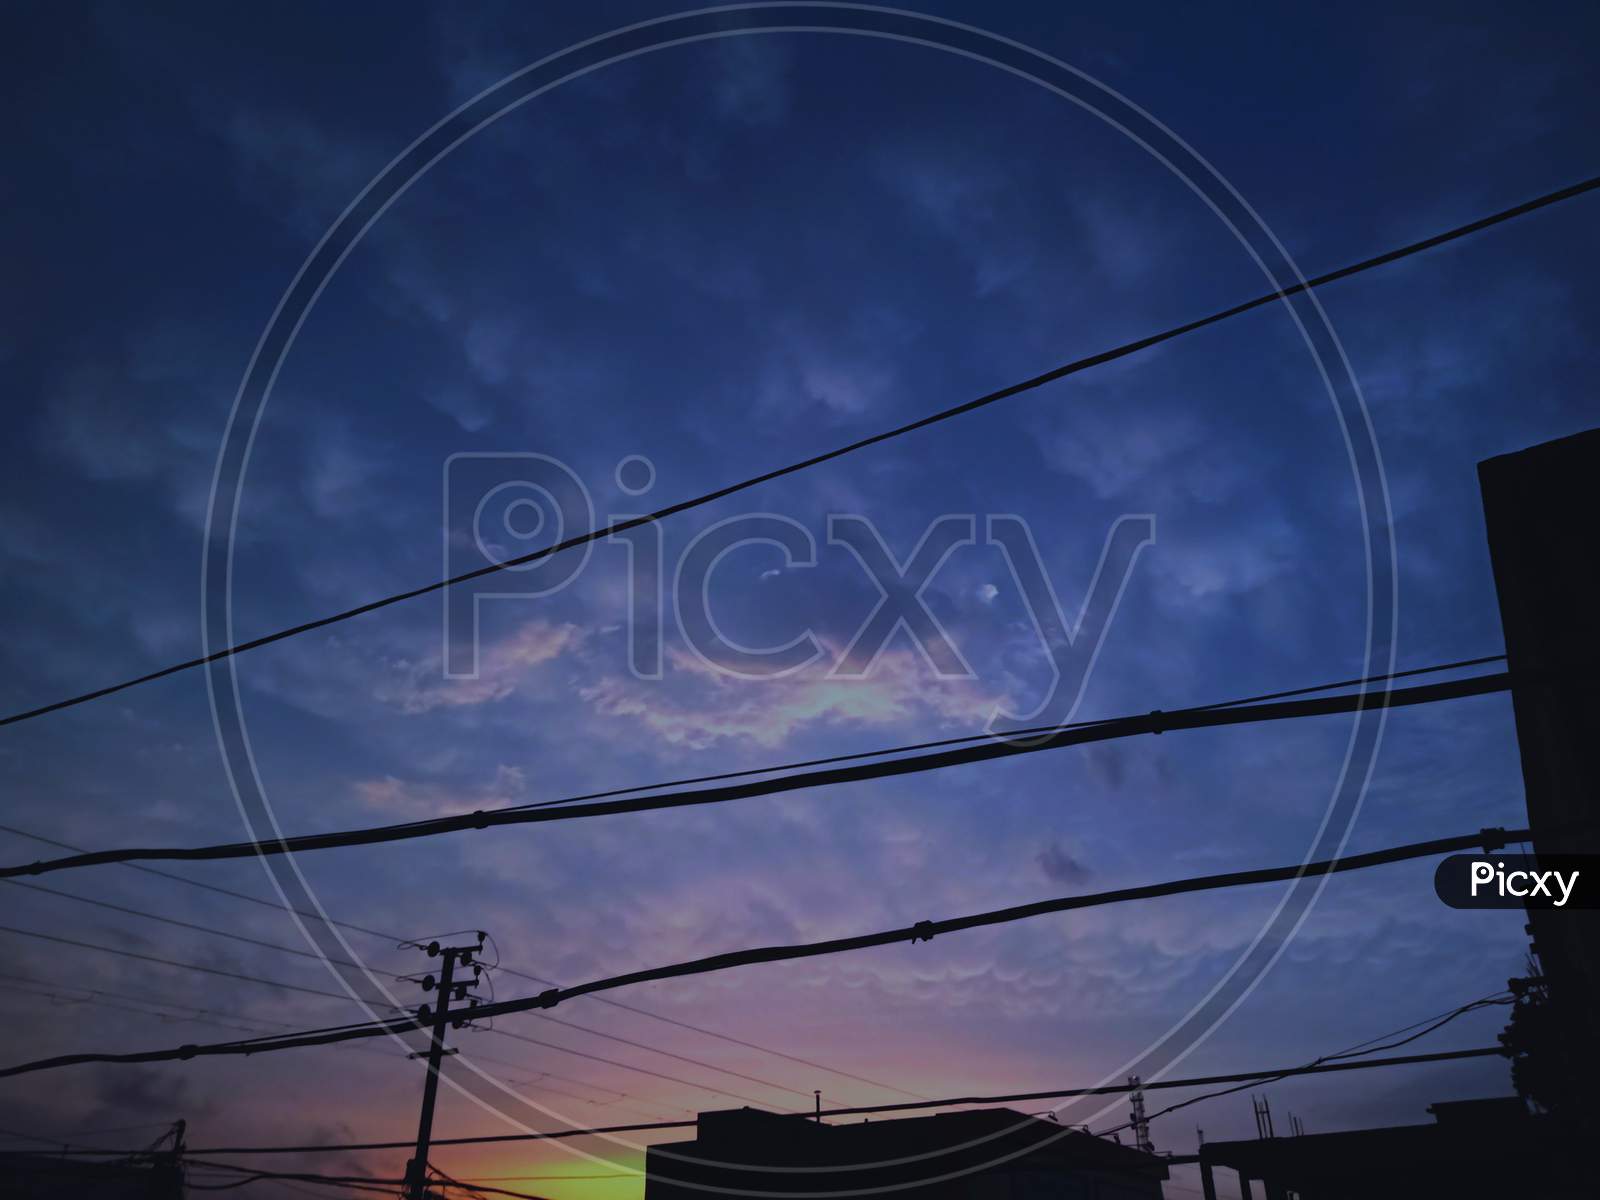 Beautiful sky background with overhead power line